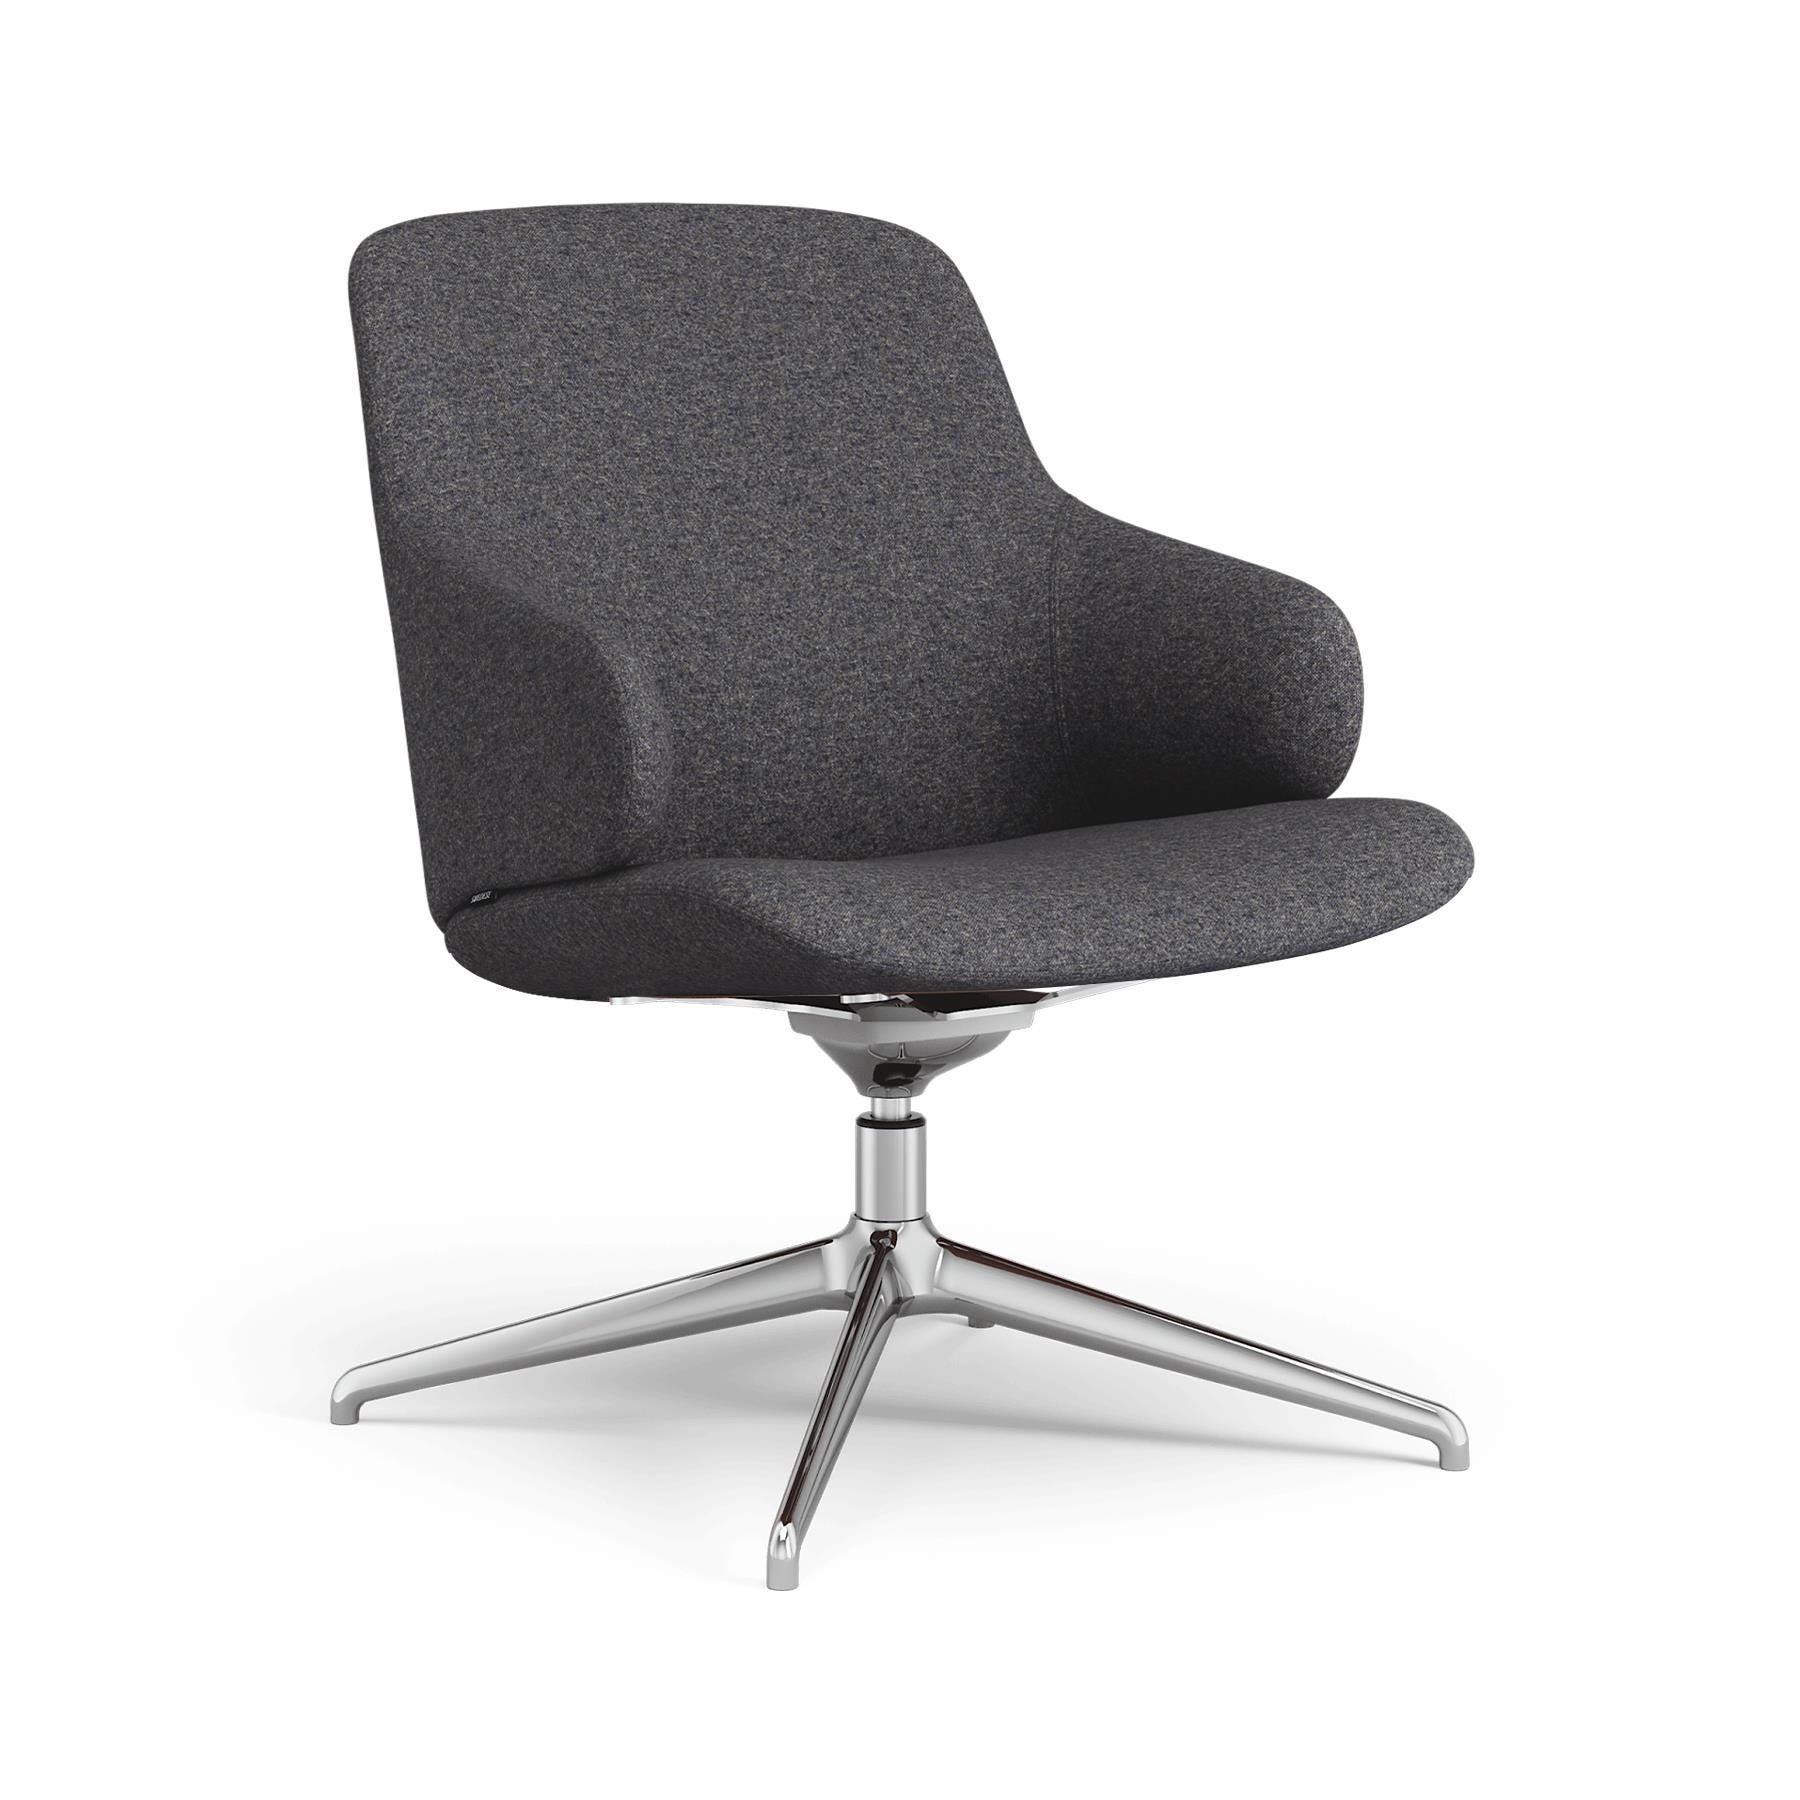 Swedese Amstelle Easy Chair Swivel Polished Aluminium Bardal 770 Grey Designer Furniture From Holloways Of Ludlow